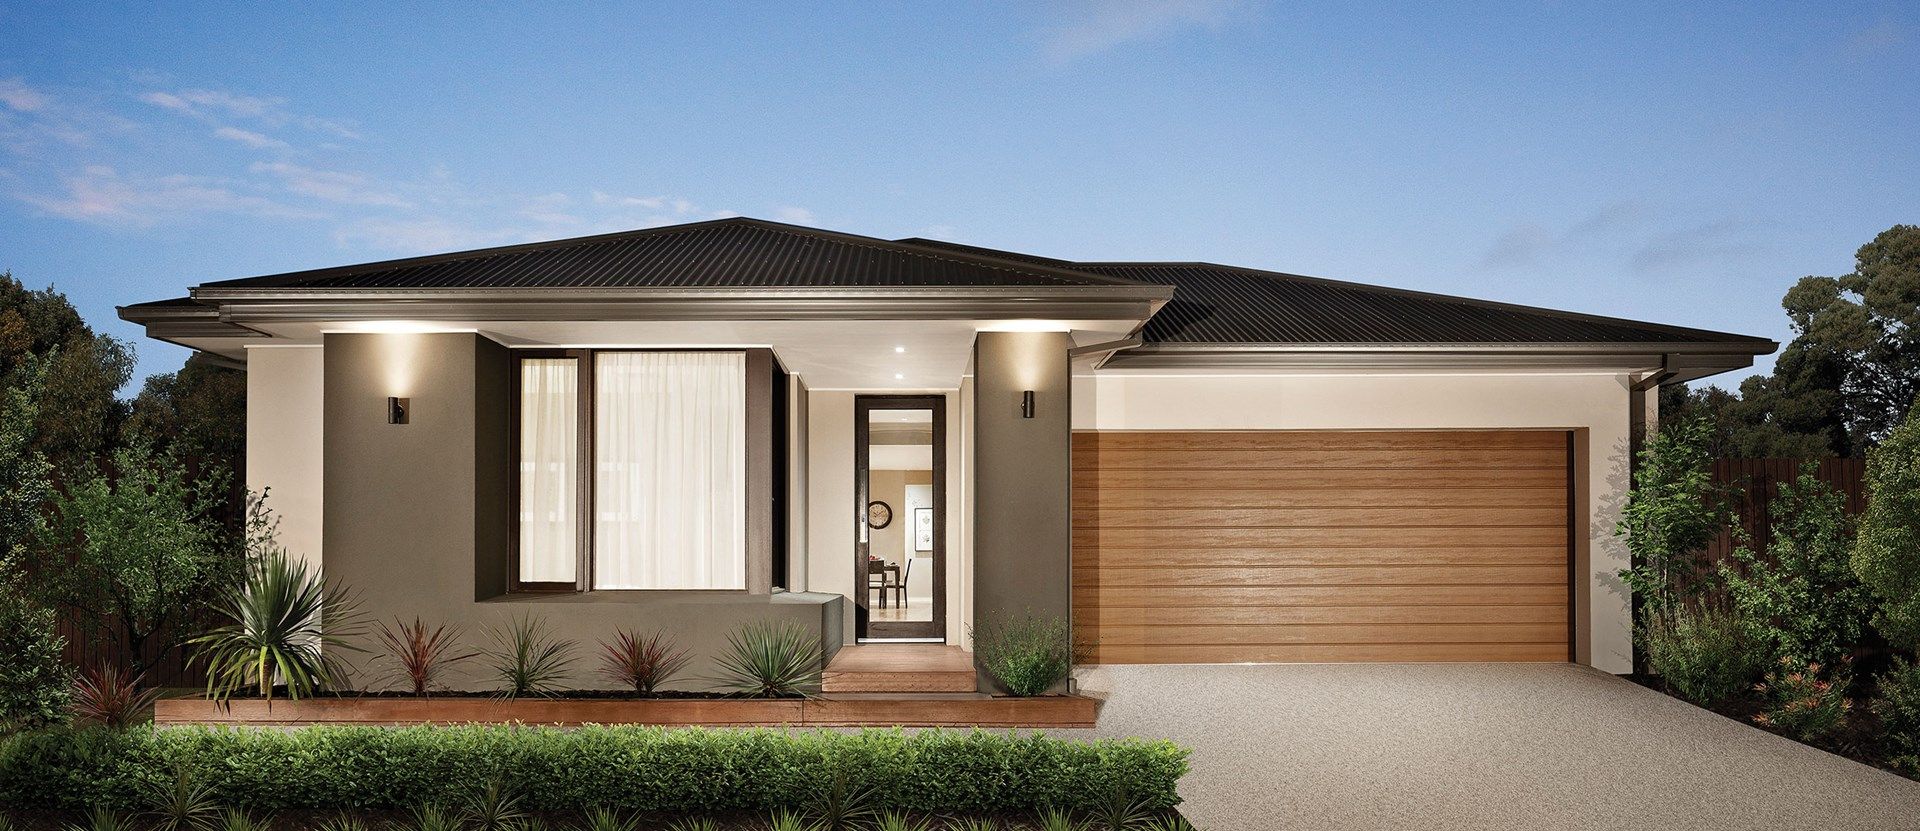 Carradale Road, Lot: 1237, Clyde North VIC 3978, Image 0